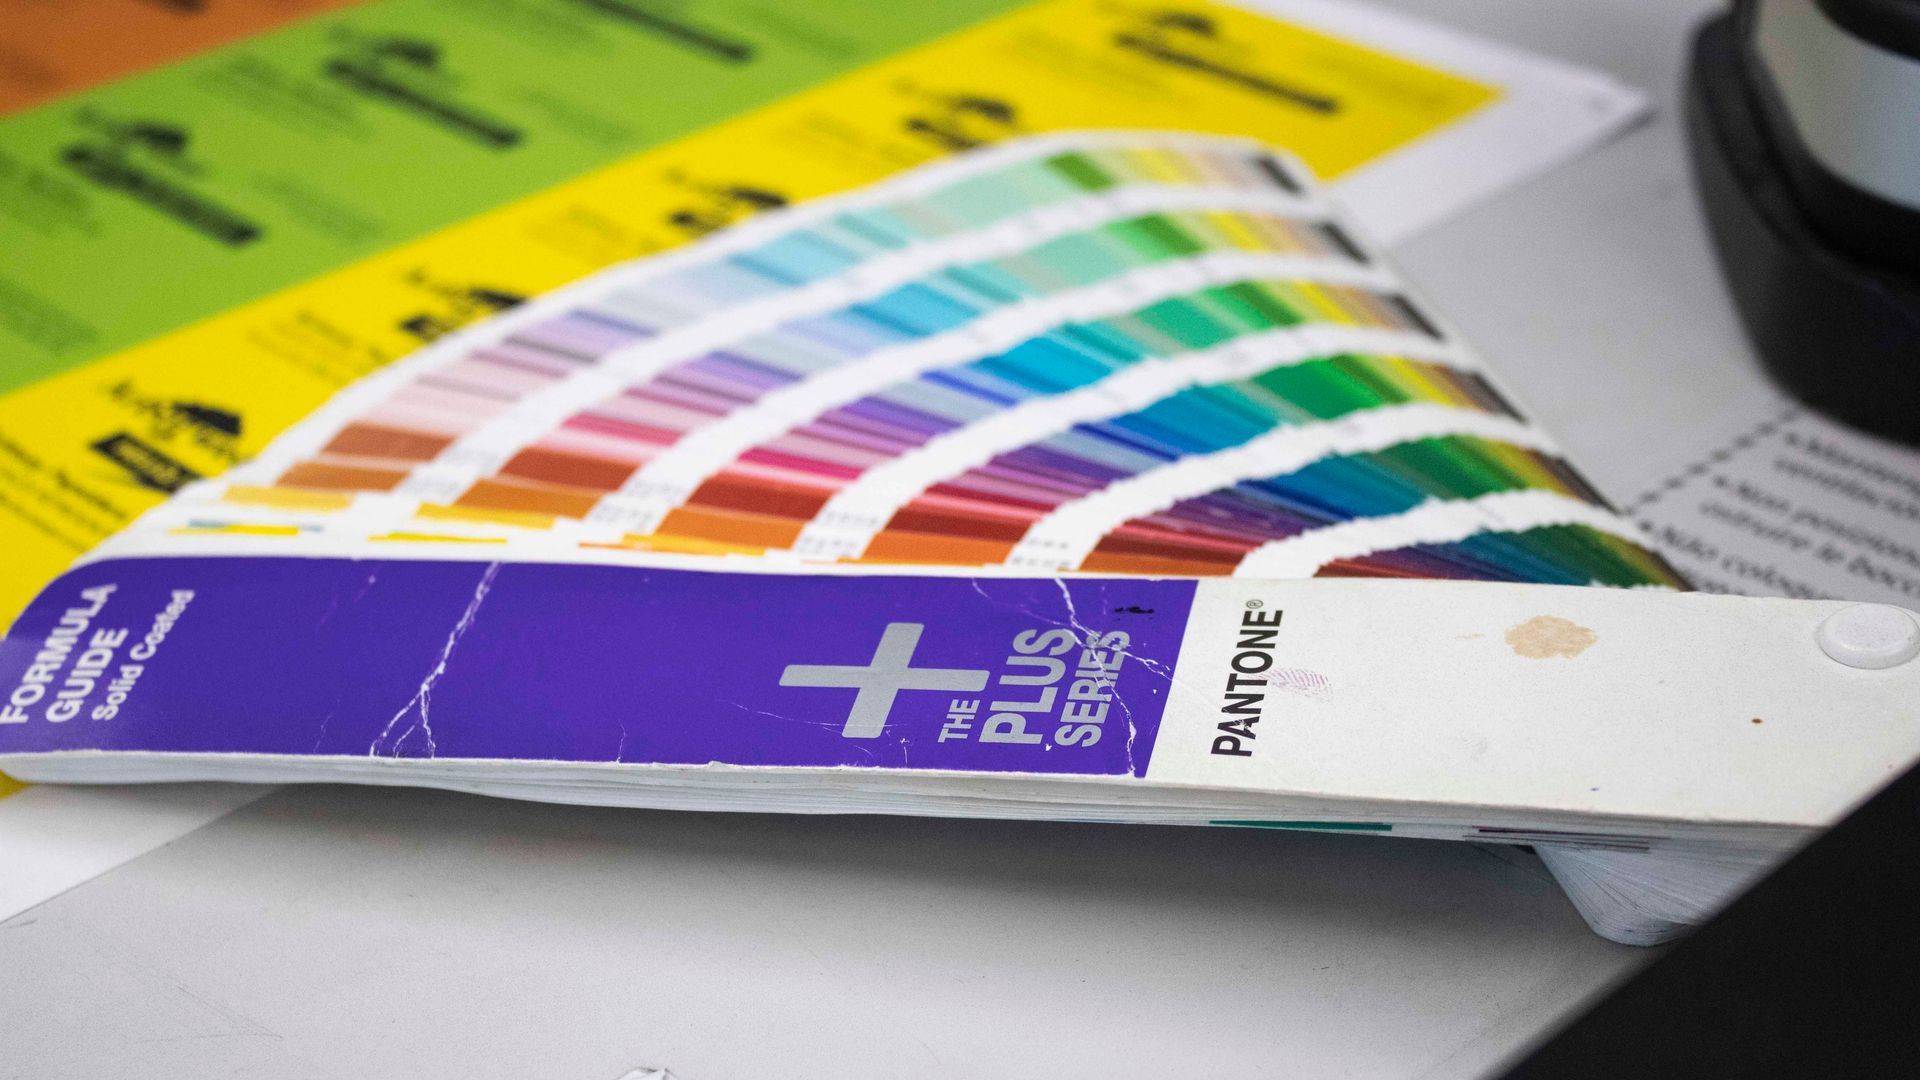 Laid out Pantone swatch book.